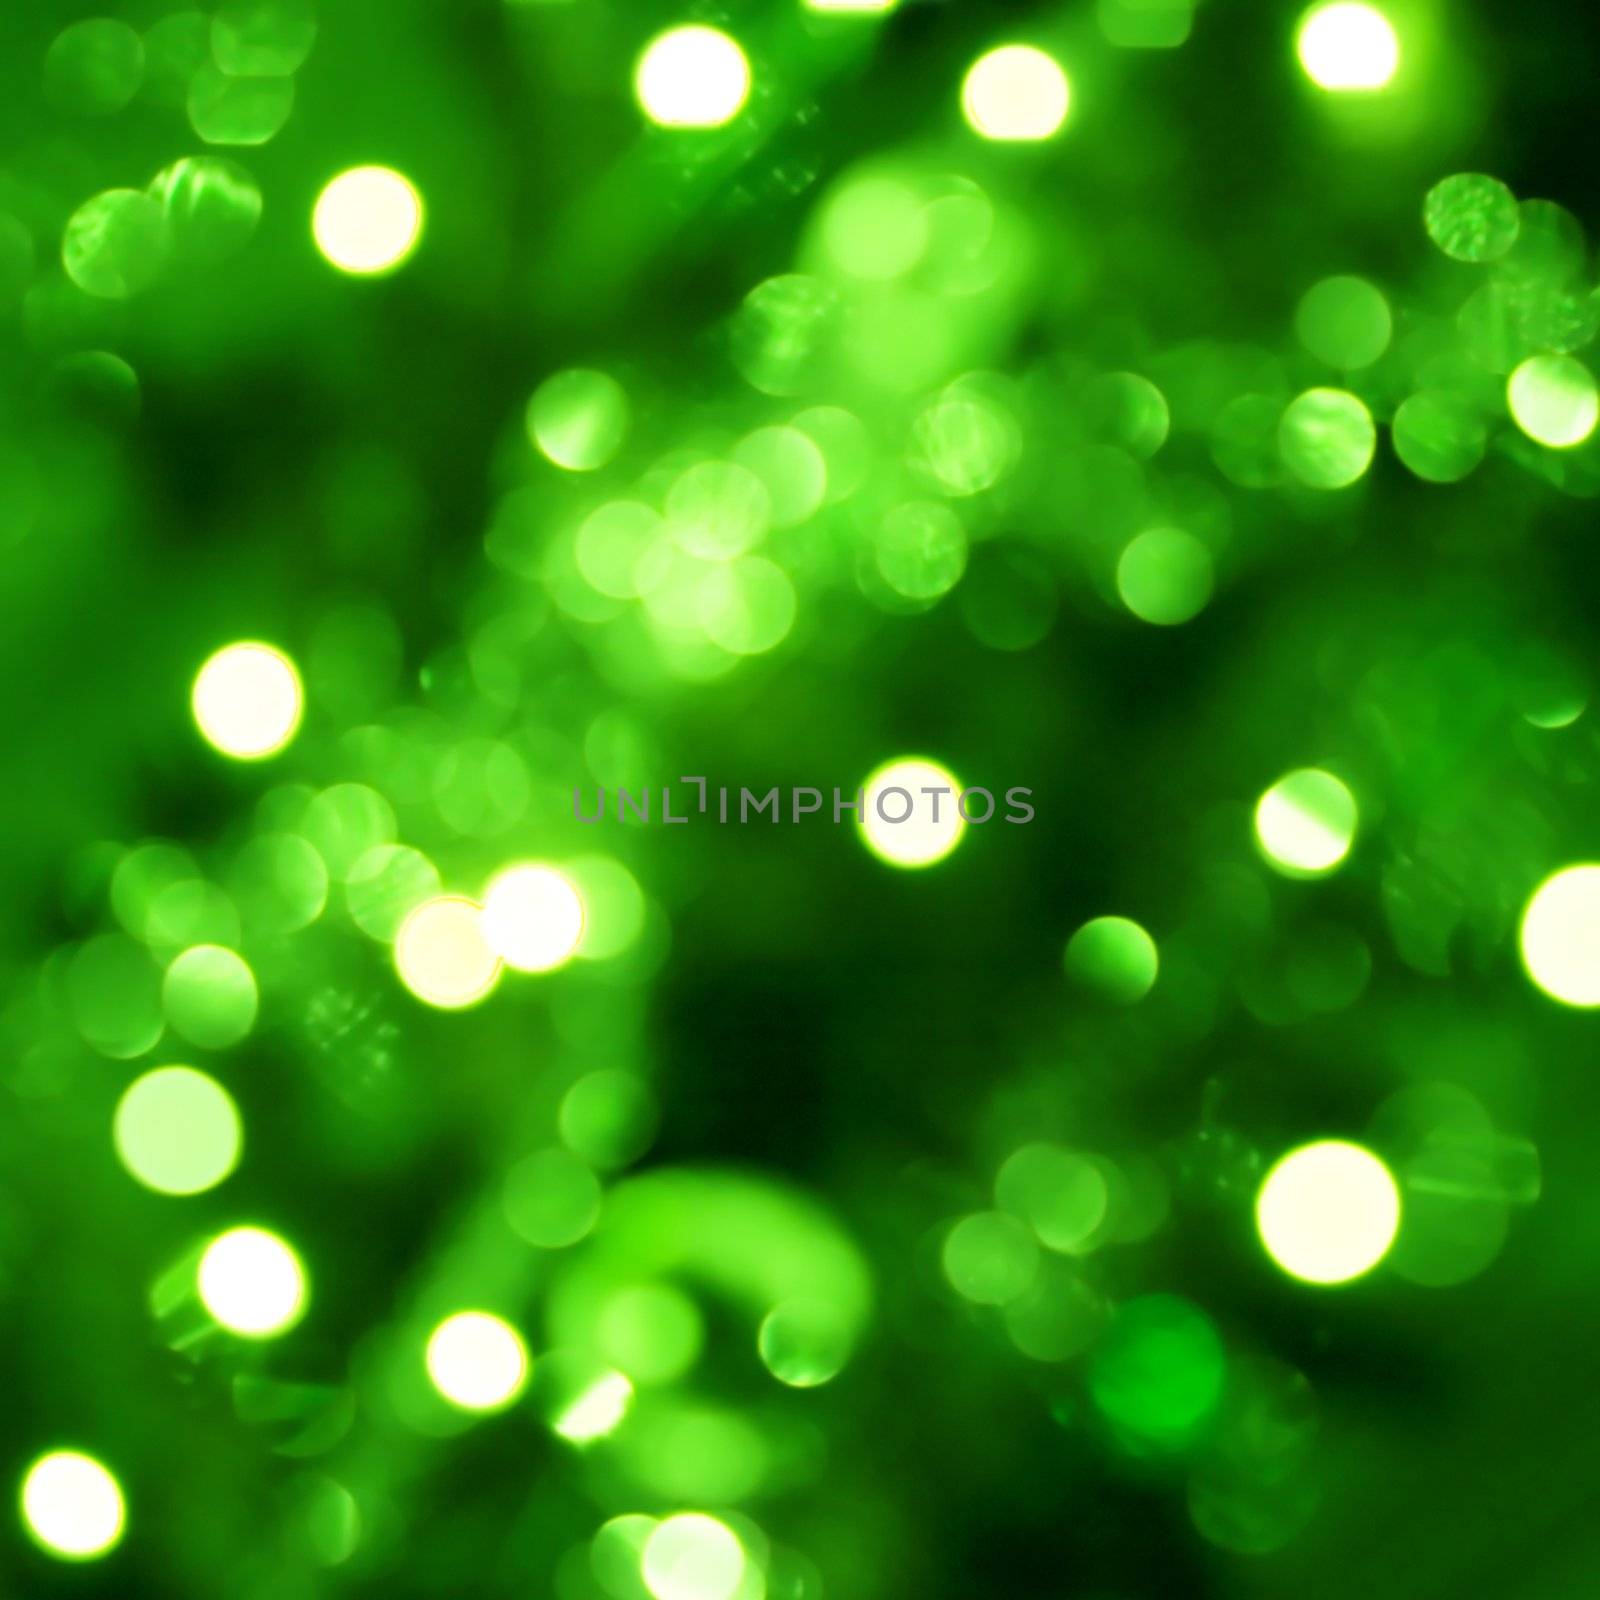 Background with out of focus light dots in green